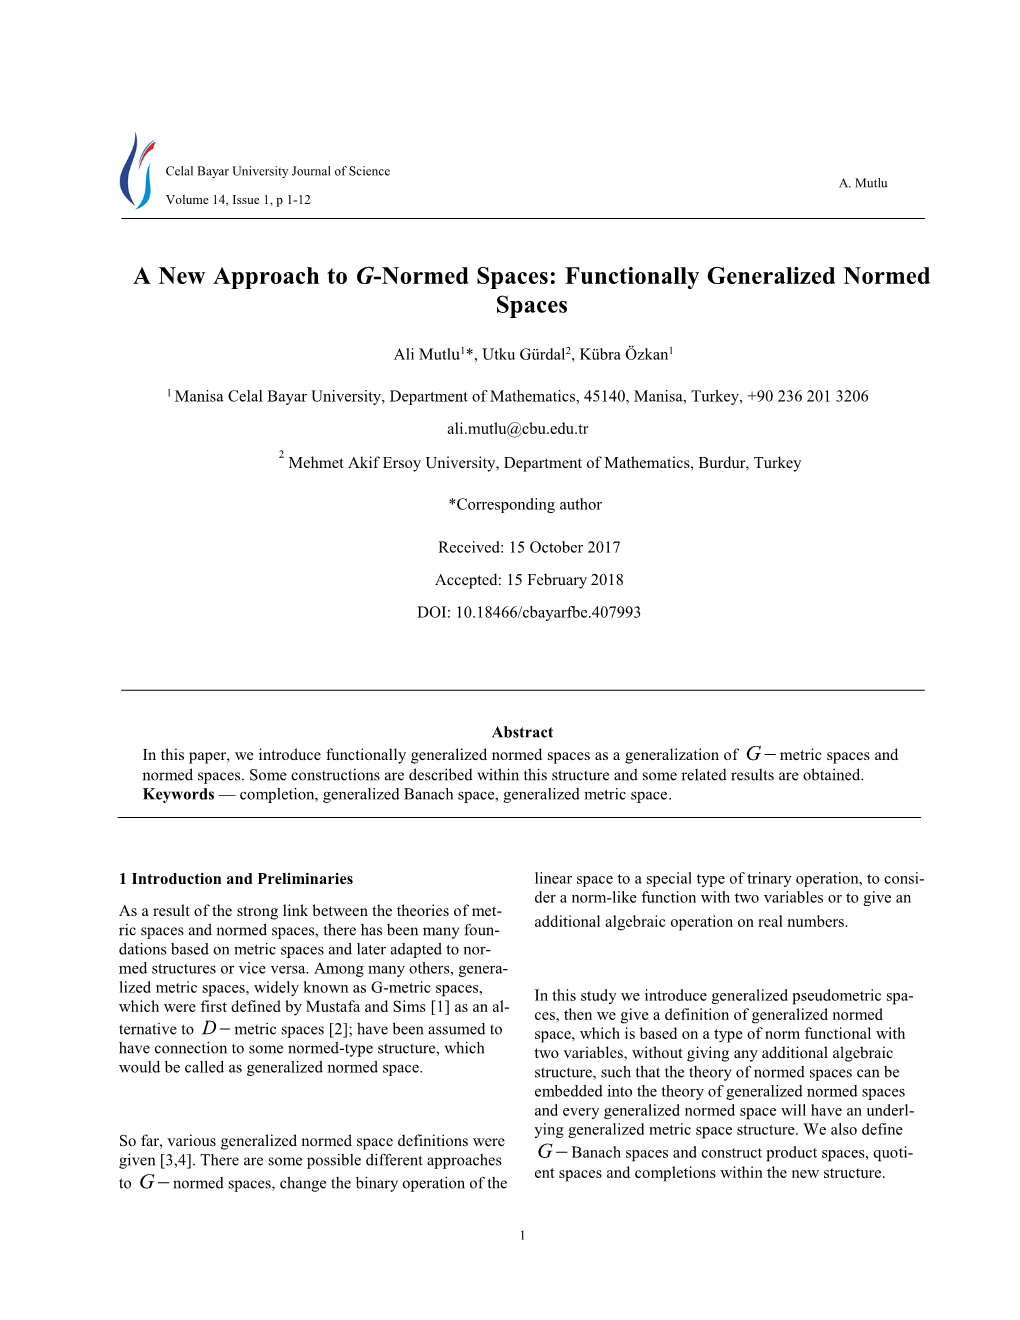 A New Approach to G-Normed Spaces: Functionally Generalized Normed Spaces